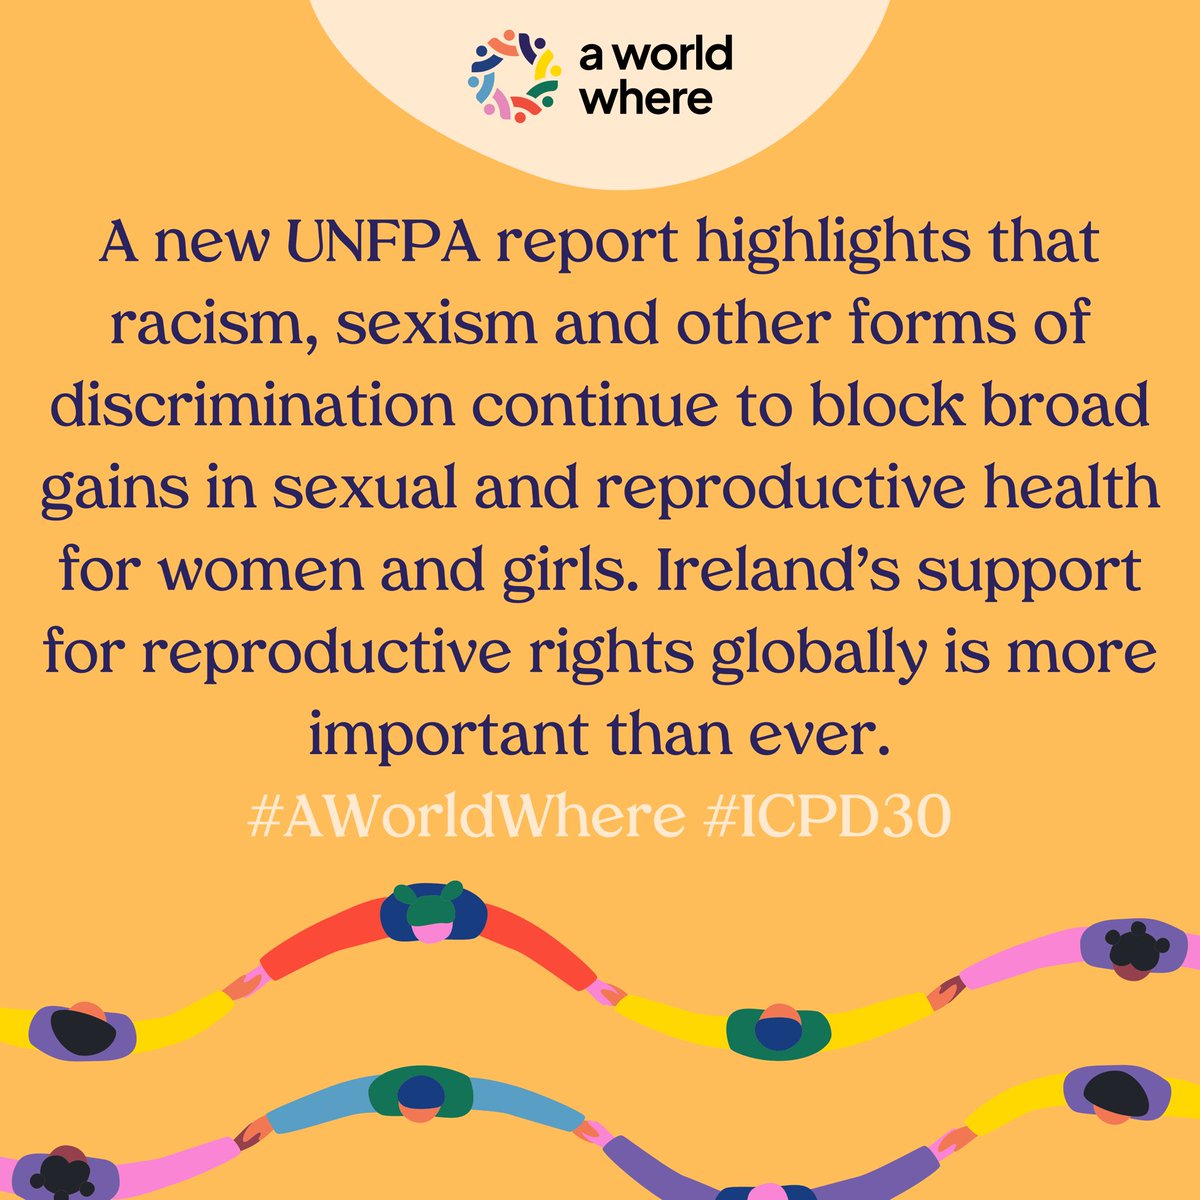 We’re supporting the @IrishFPA campaign for #AWorldWhere global access to sexual and reproductive health and rights is a reality for all! 🌍✊ Join us in spreading positivity and advocating for global access. #AWorldWhere #ICPD30